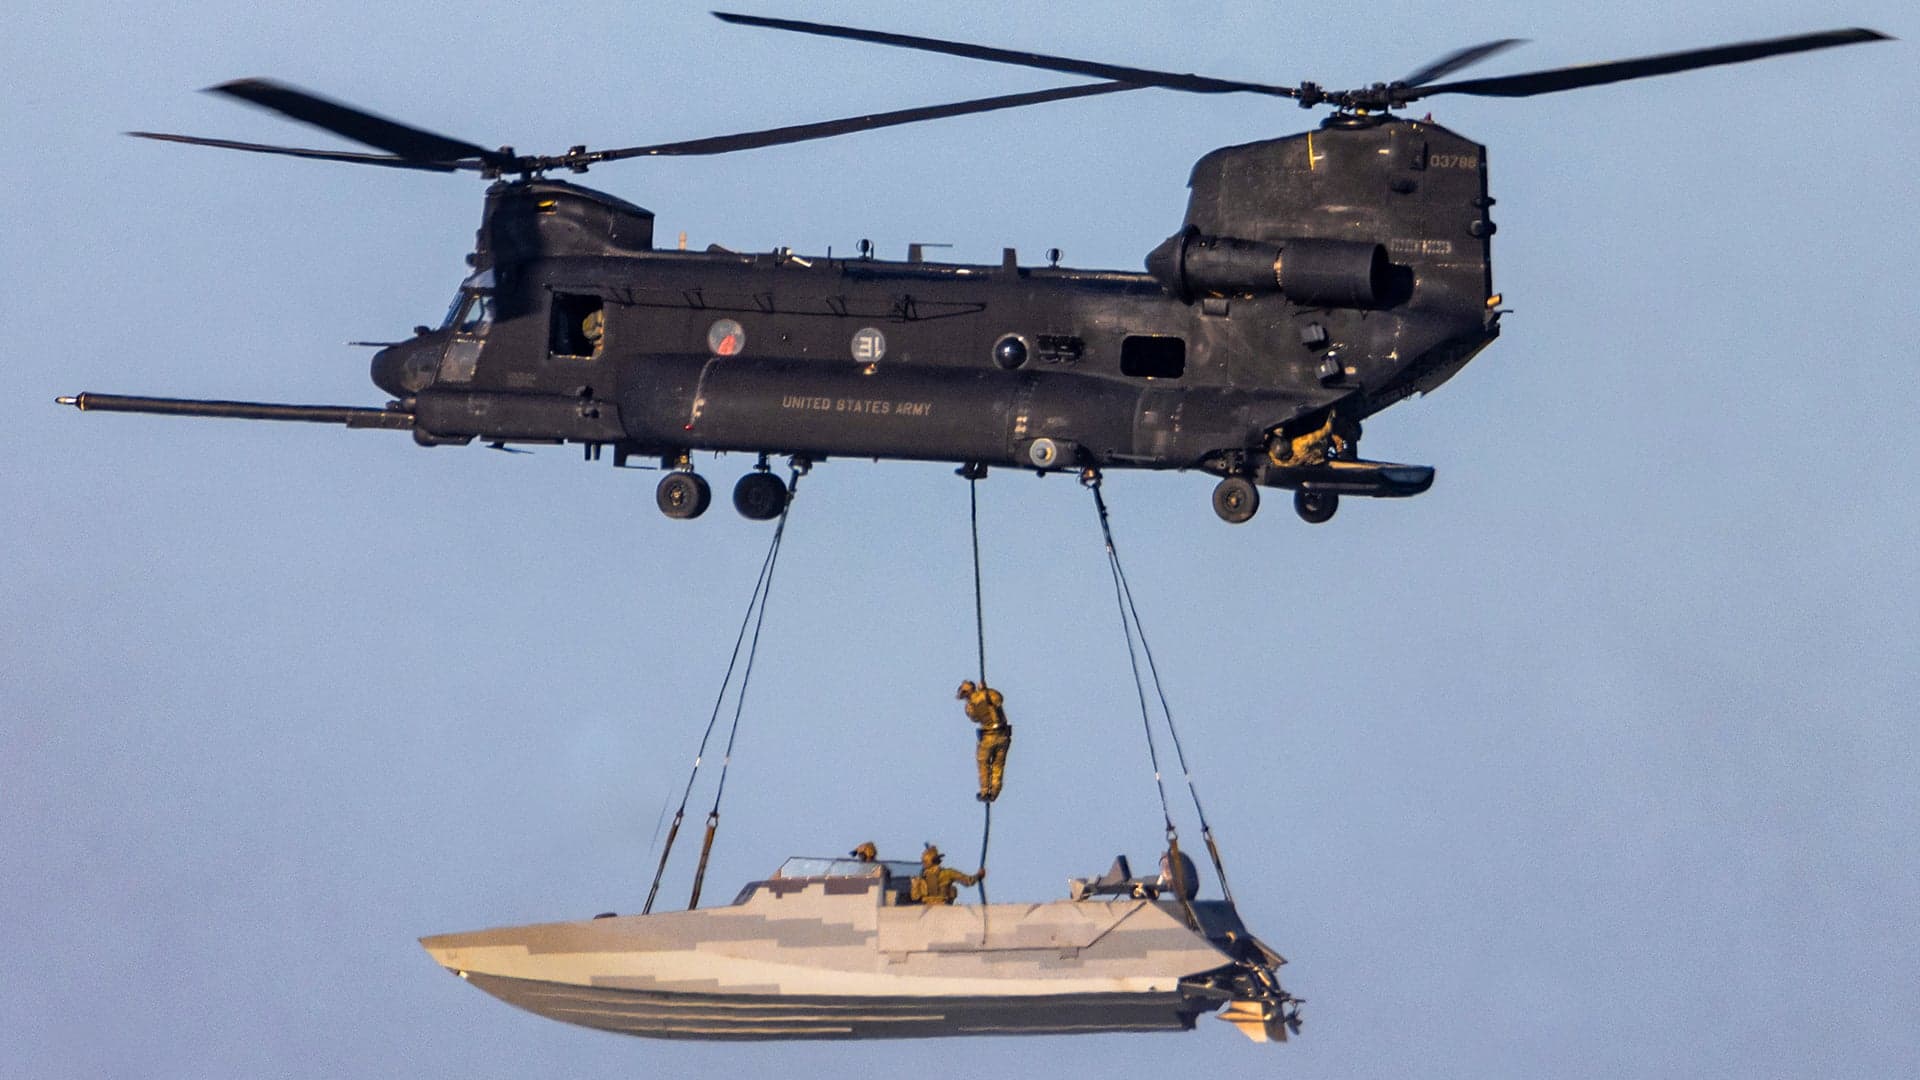 Navy SEALs And Army Night Stalkers Captured In Amazing Photos During Virginia Exercise